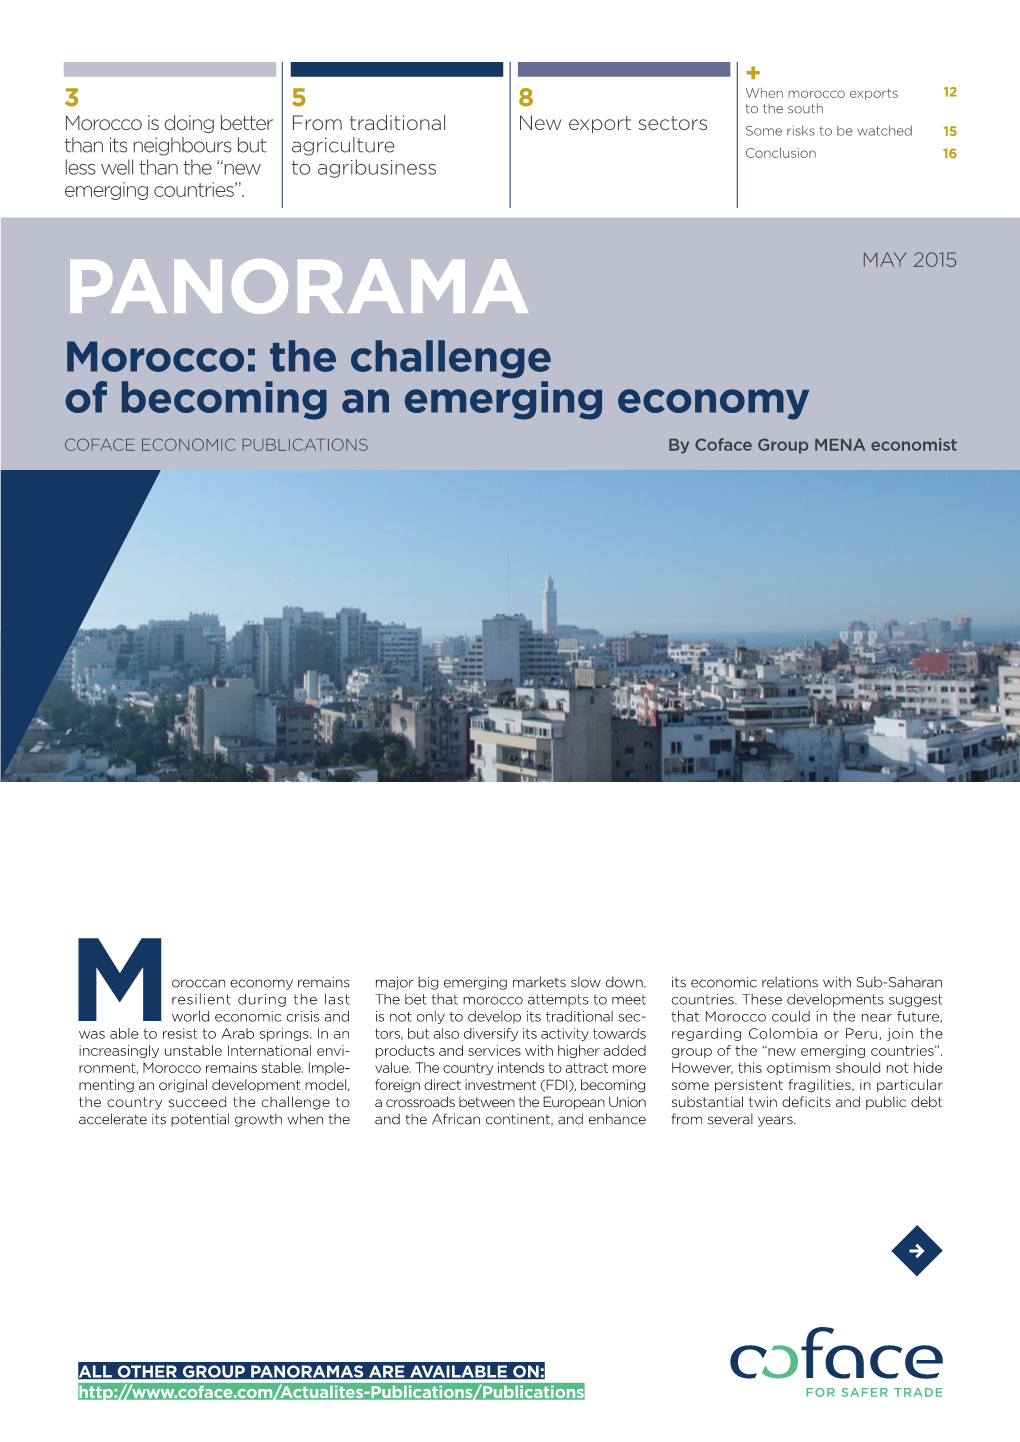 Morocco: the Challenge of Becoming an Emerging Economy COFACE ECONOMIC PUBLICATIONS by Coface Group MENA Economist